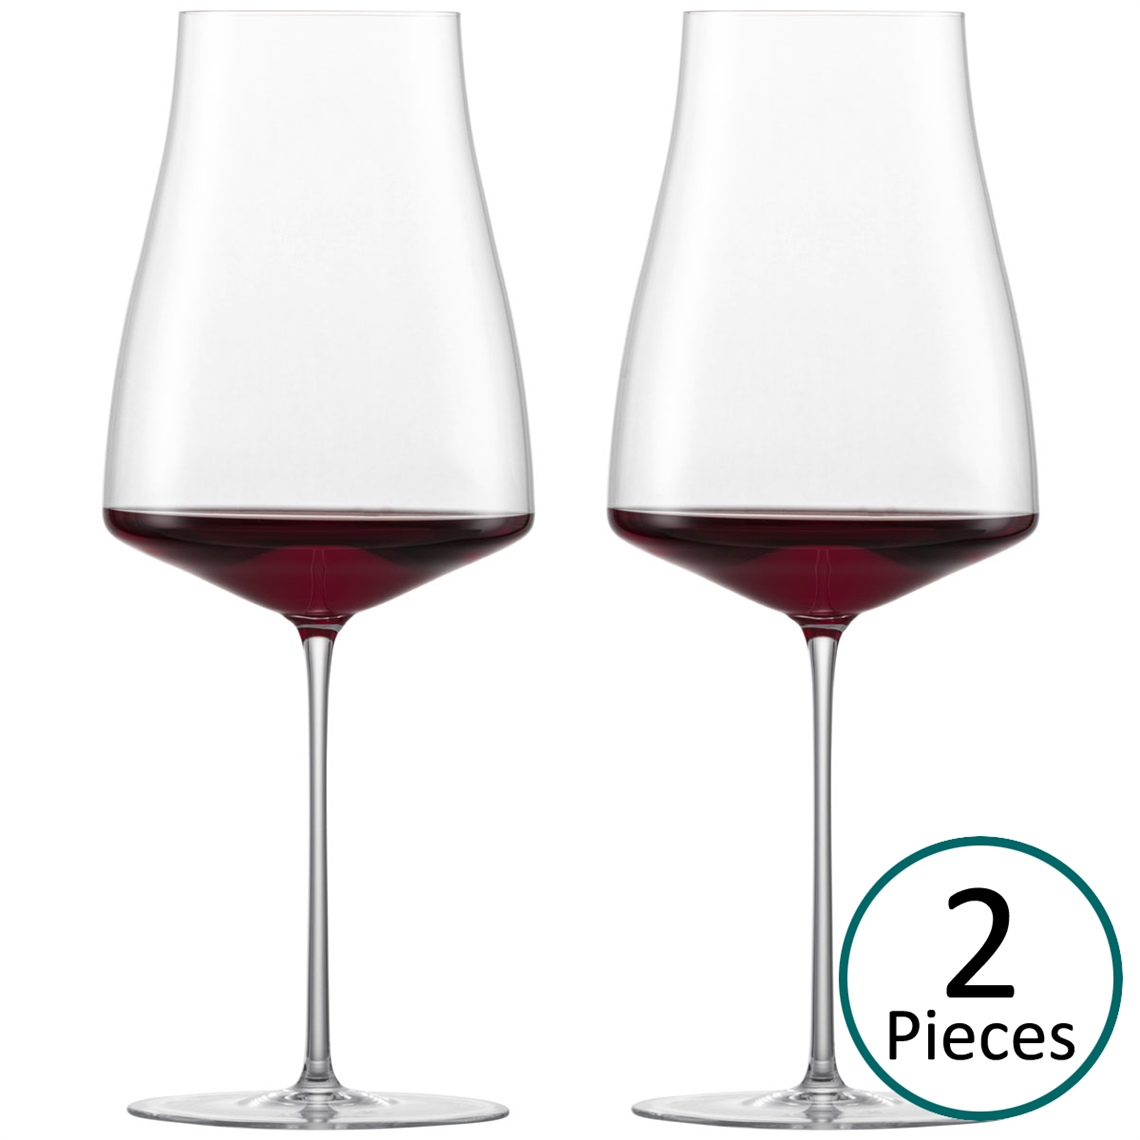 Zwiesel 1872 The Moment Bordeaux Glass - Set of 2